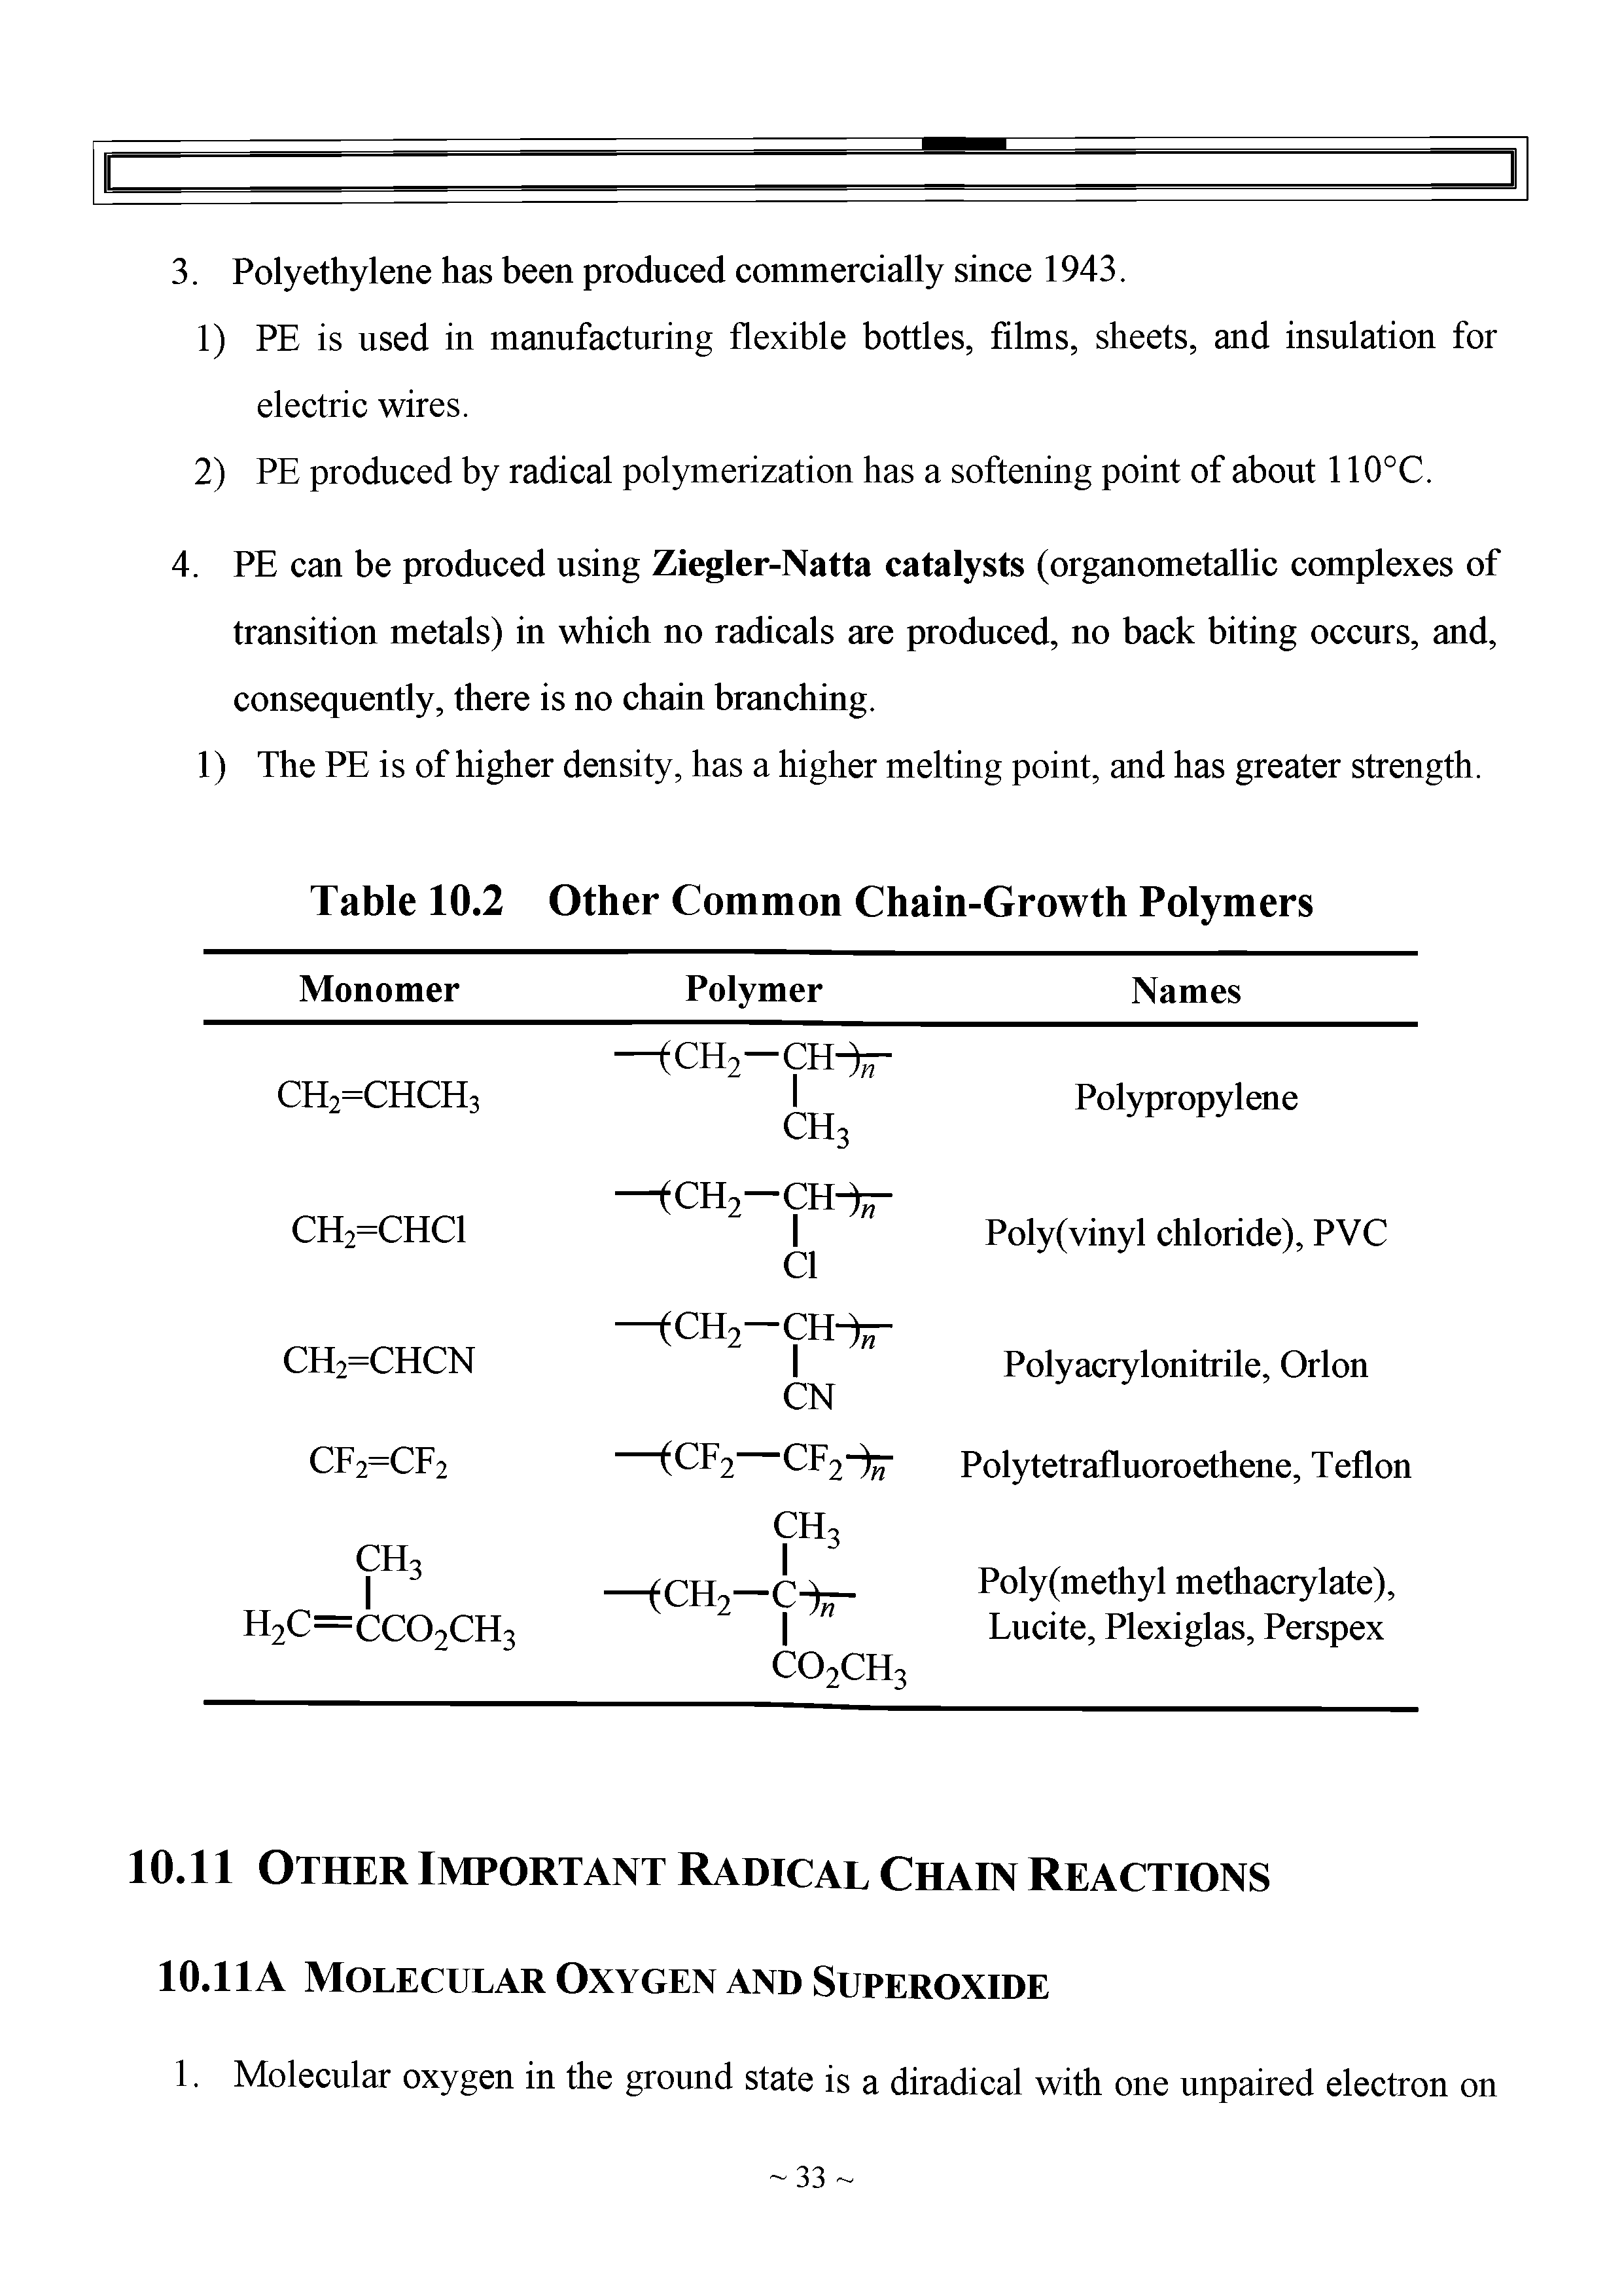 Table 10.2 Other Common Chain-Growth Polymers...